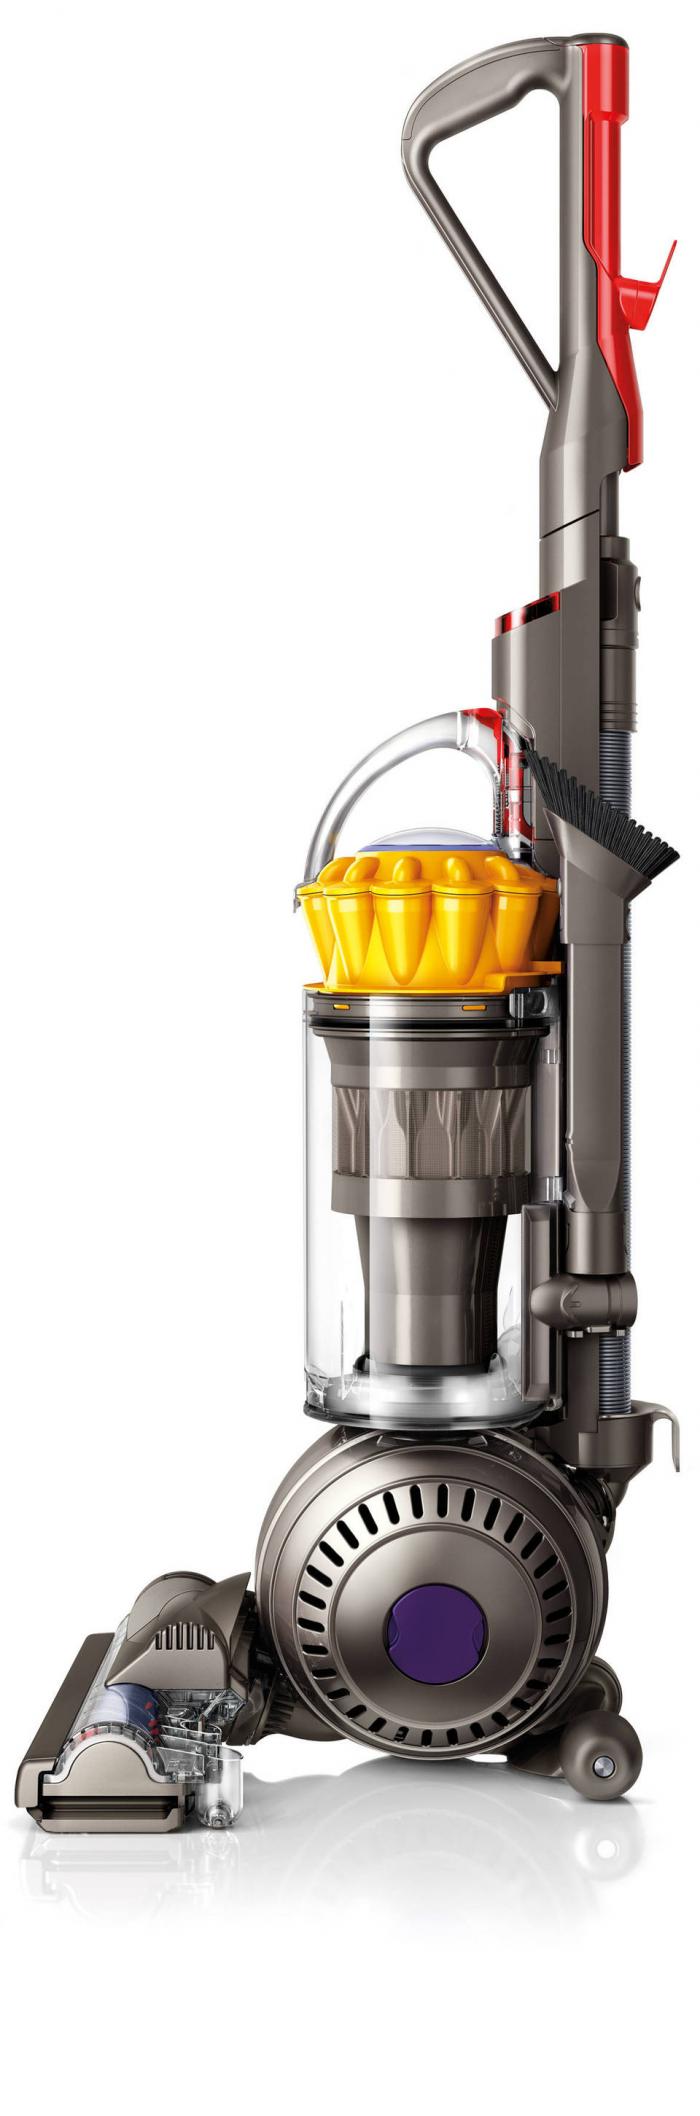 Dyson Ball Total Clean Vacuum,InStore Products